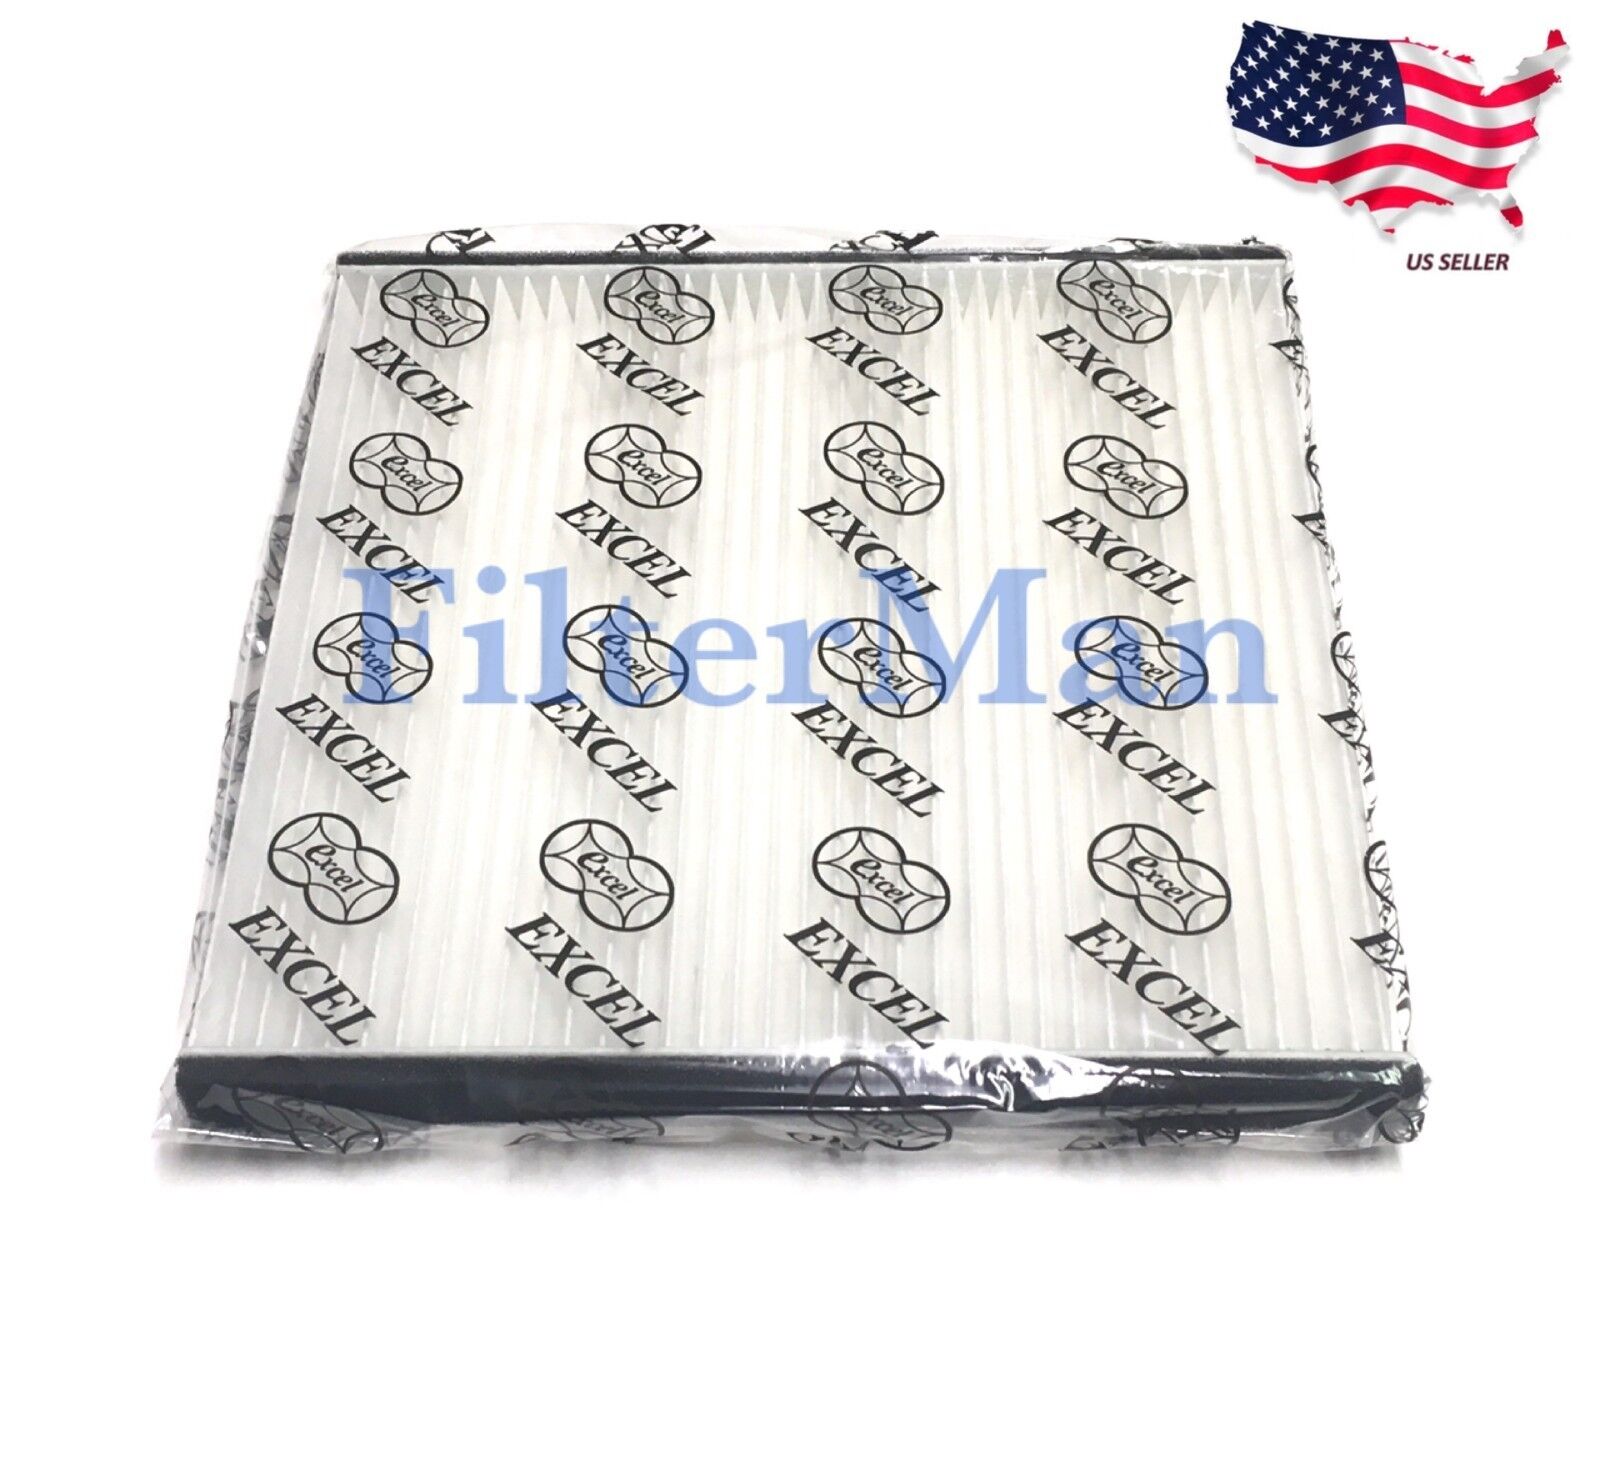 CABIN AIR FILTER For Lexus RX350 RX330 ES330 GX470 RX400h Great Fit US Seller